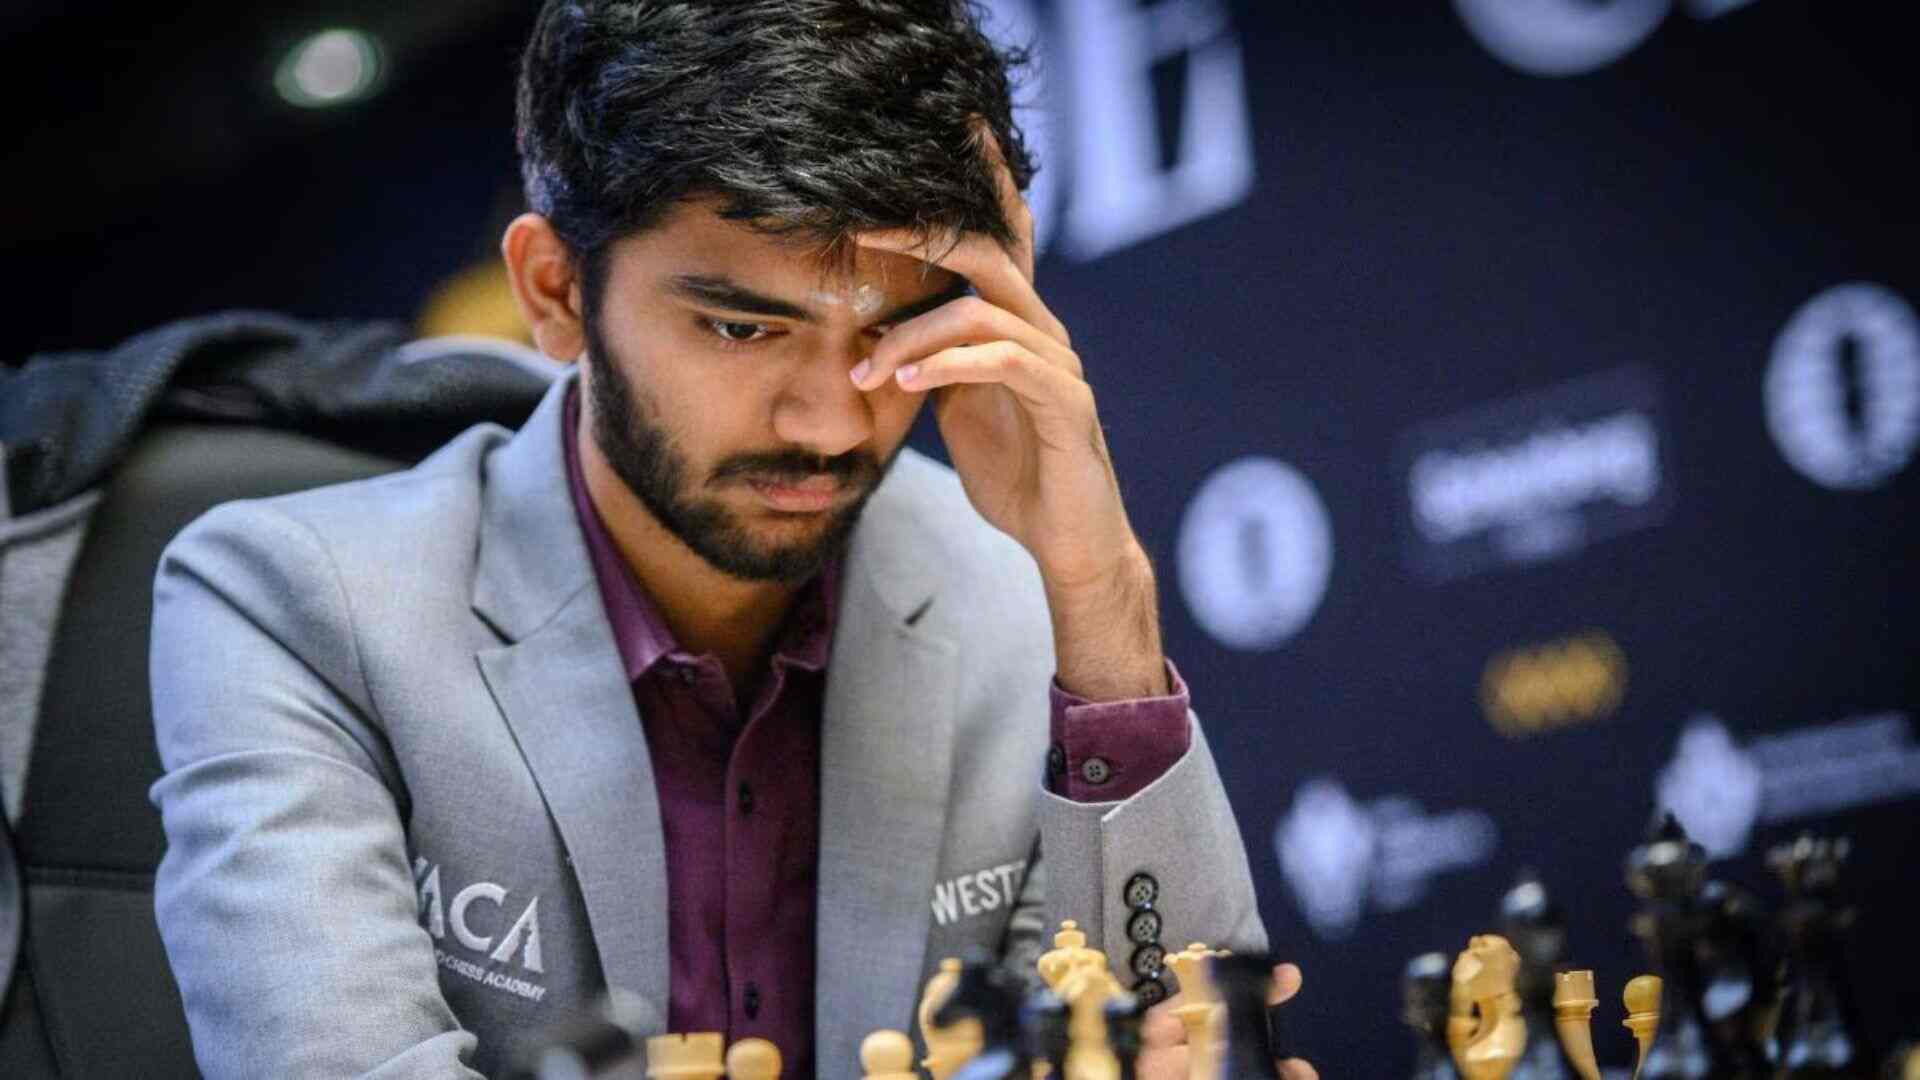 Indian Chess Prodigy Set to Take on Chinese Grandmaster for World Title